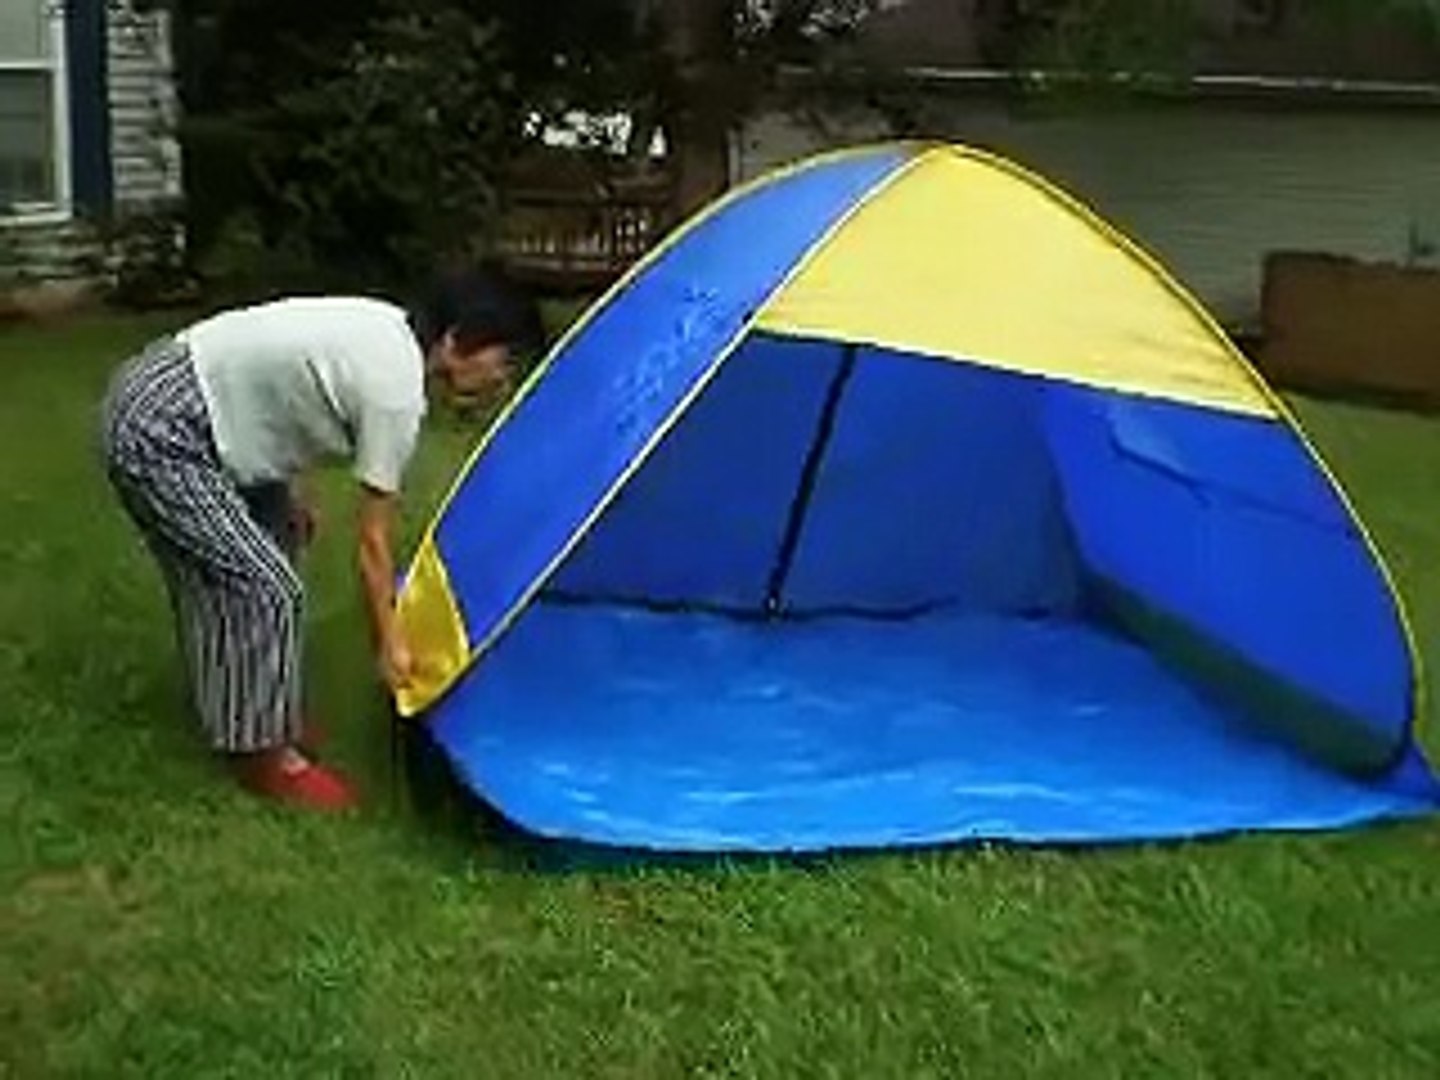 How to fold a pop up beach tent - video Dailymotion